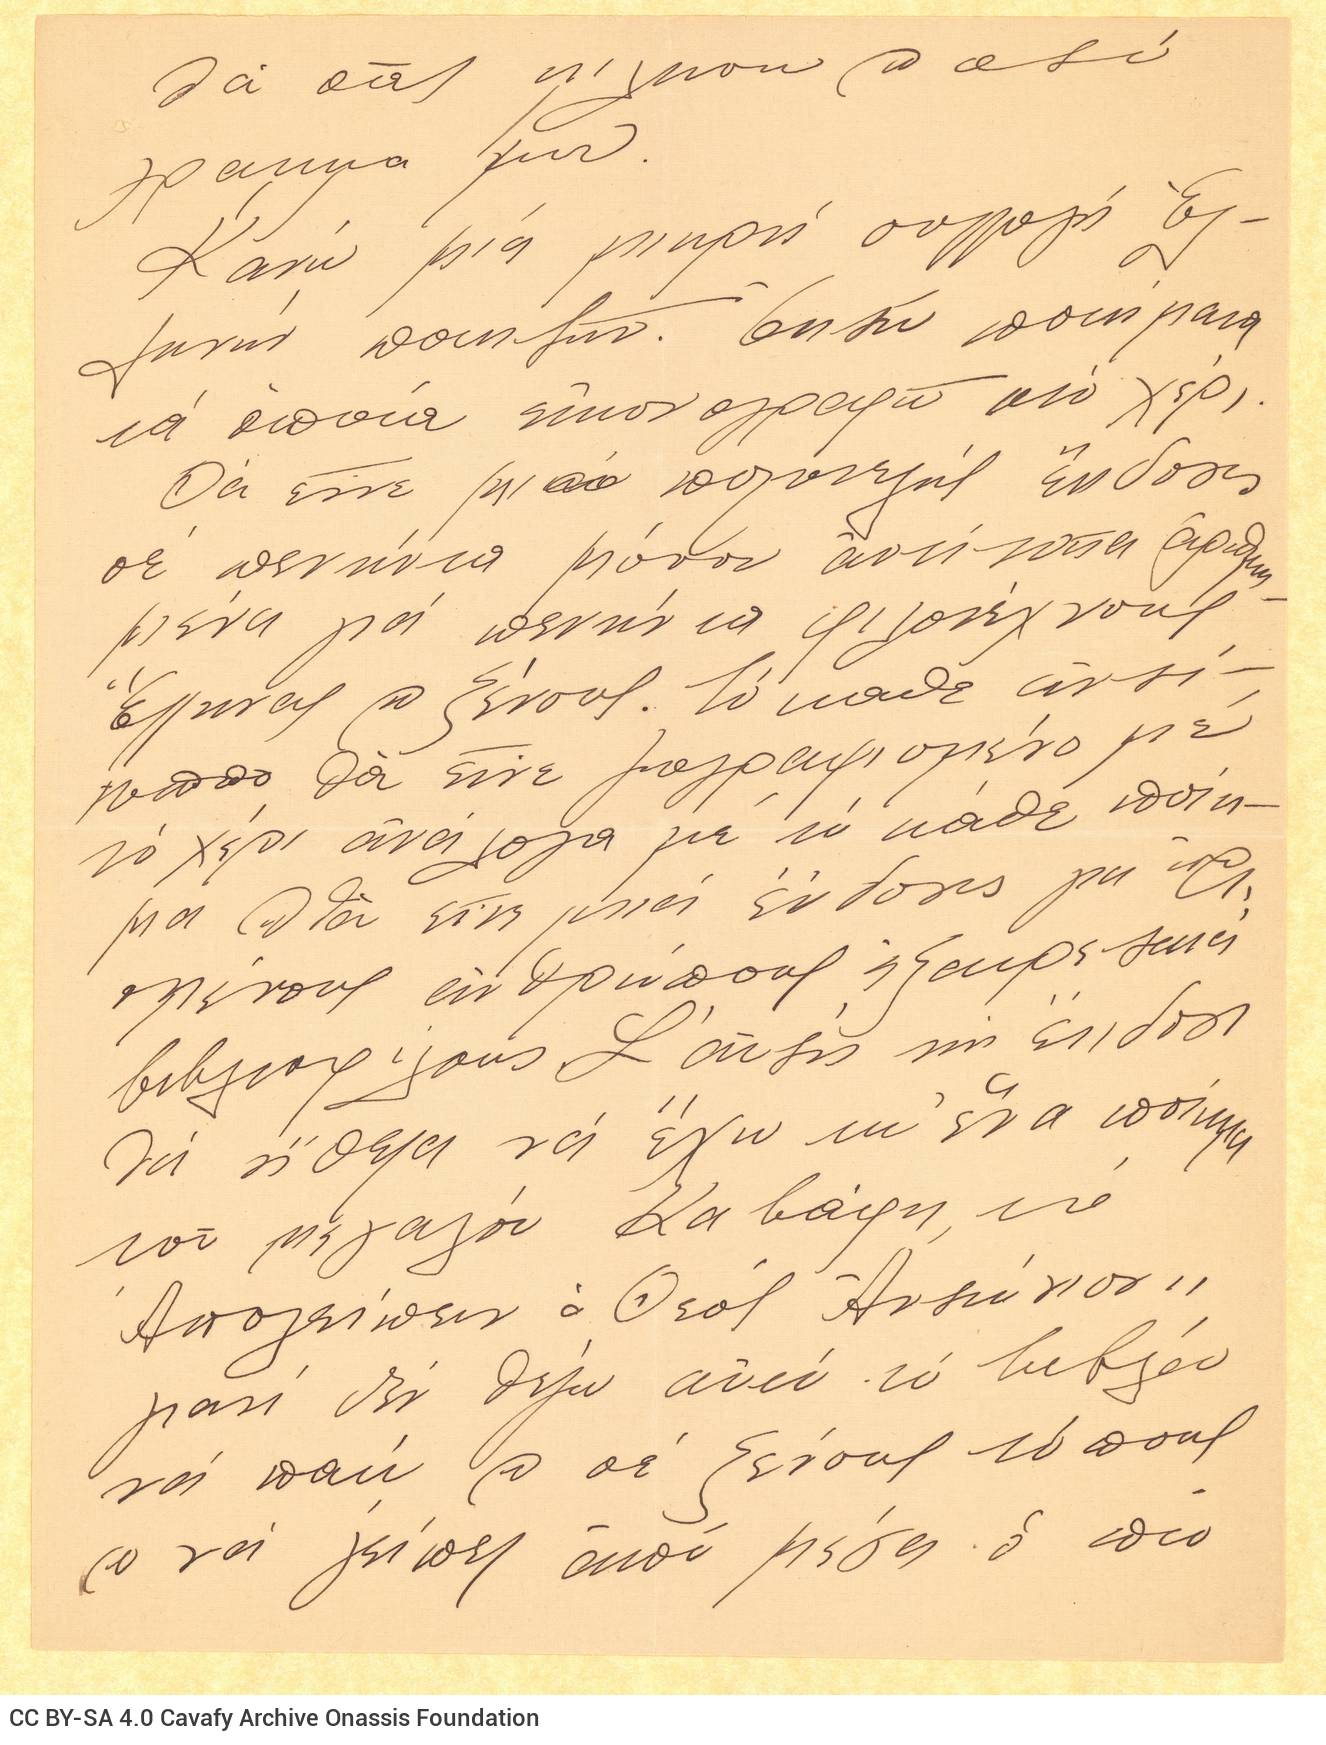 Handwritten letter by Céleste Polychroniadou to Rica Singopoulo on the recto of three sheets. Blank verso. She congratulates